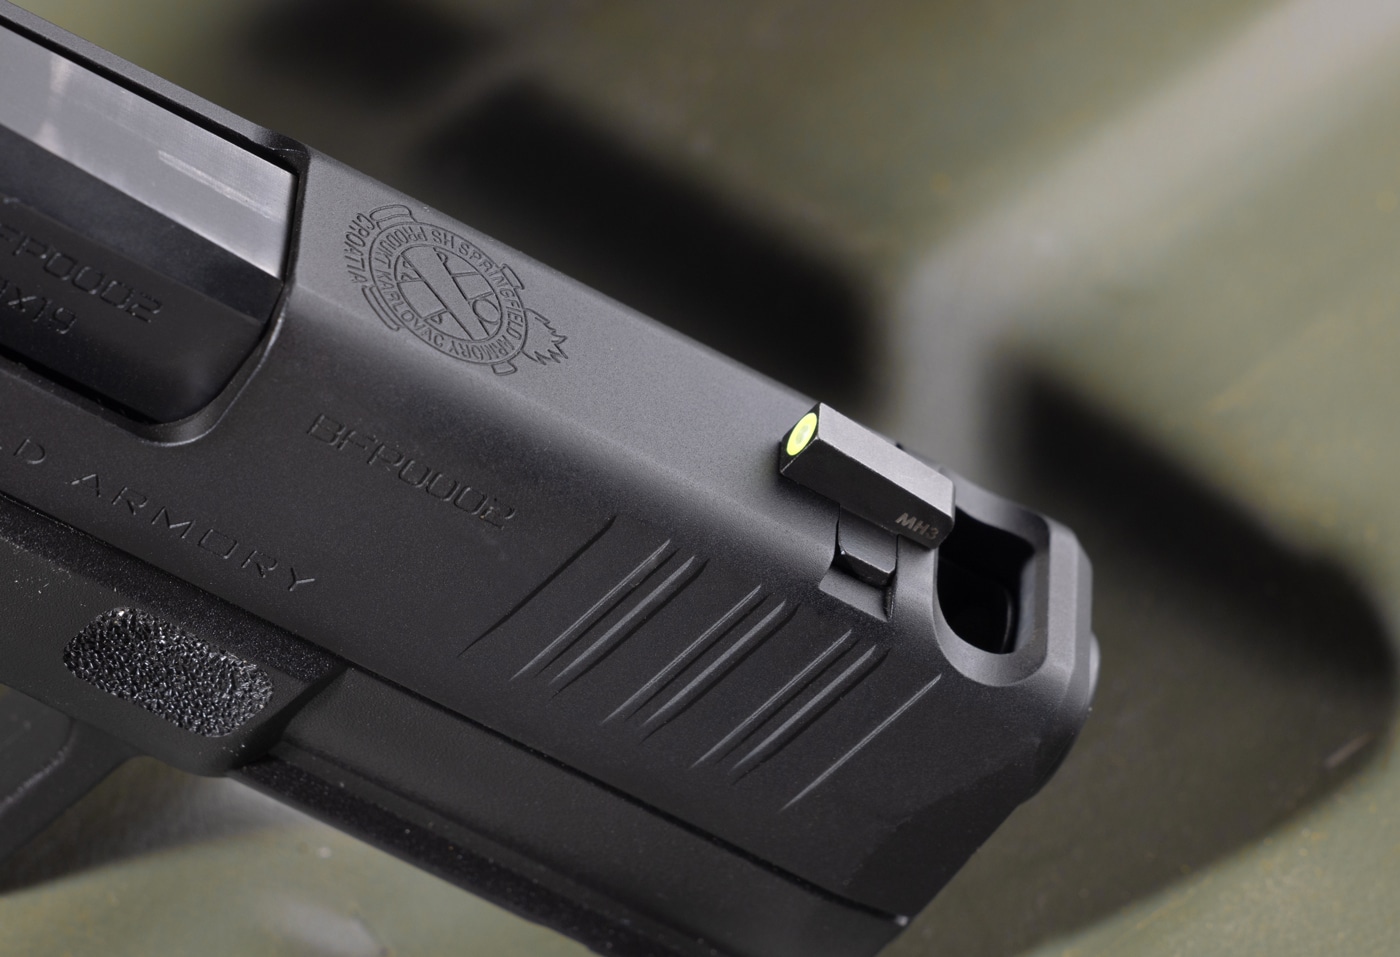 In this photo we see a close up photo of the ported barrel and slide on Springfield Hellcat Pro Comp. We also see the front sight, these iron sights are the U-Dot sight designed for concealed carry and self-defense.